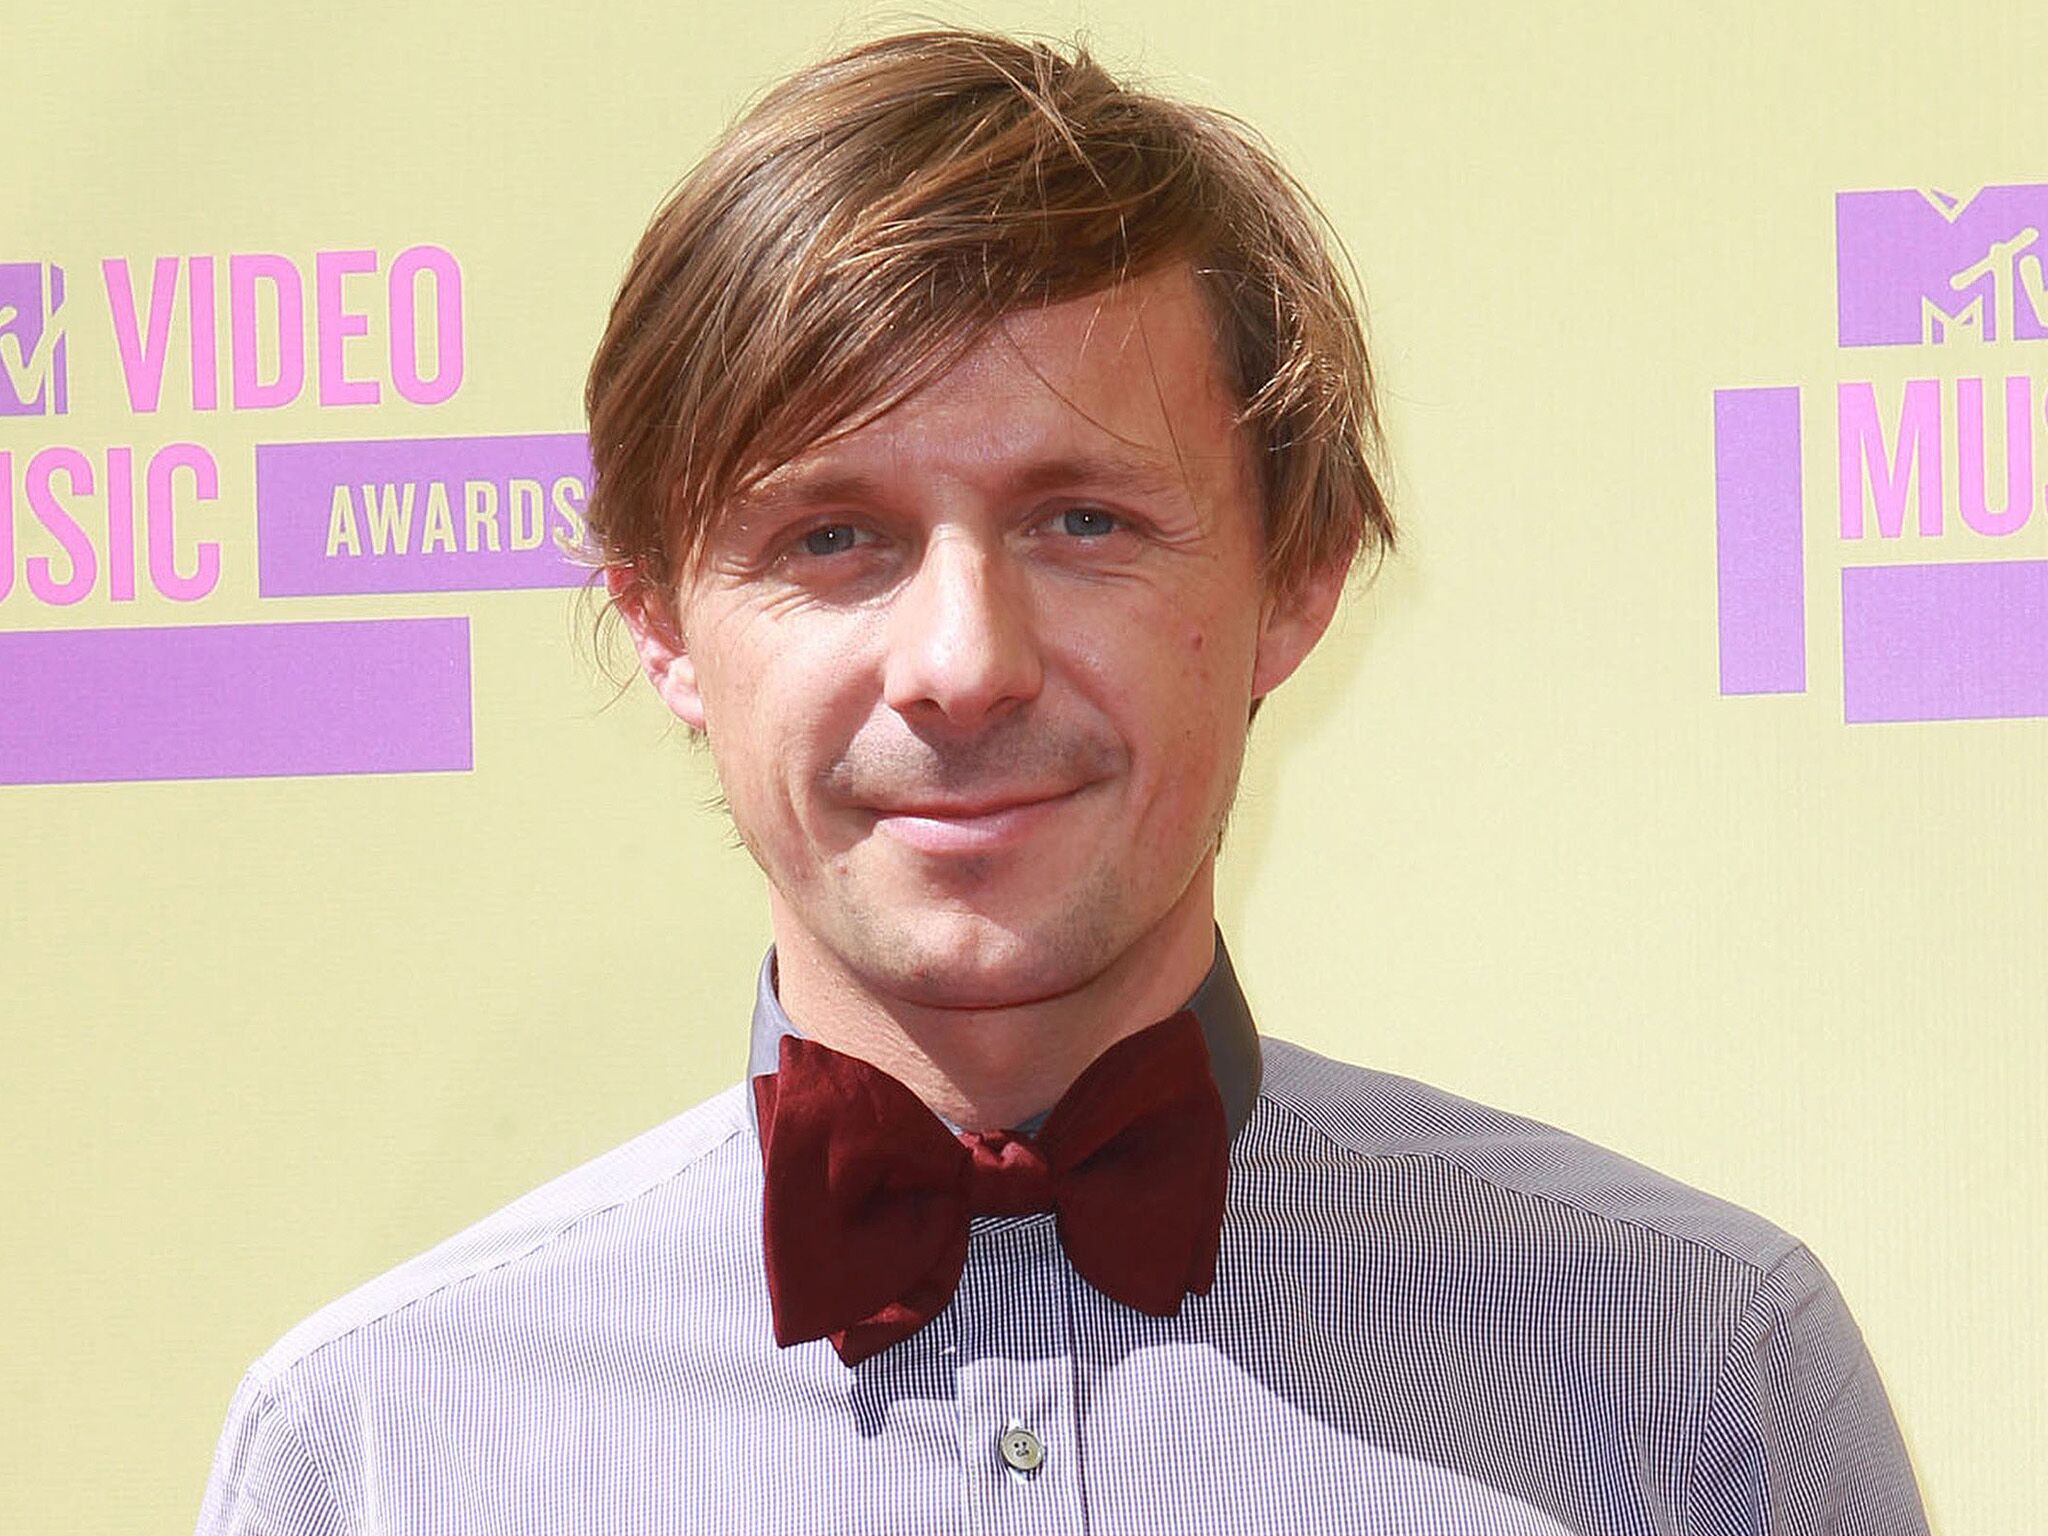 Martin Solveig Wallpapers